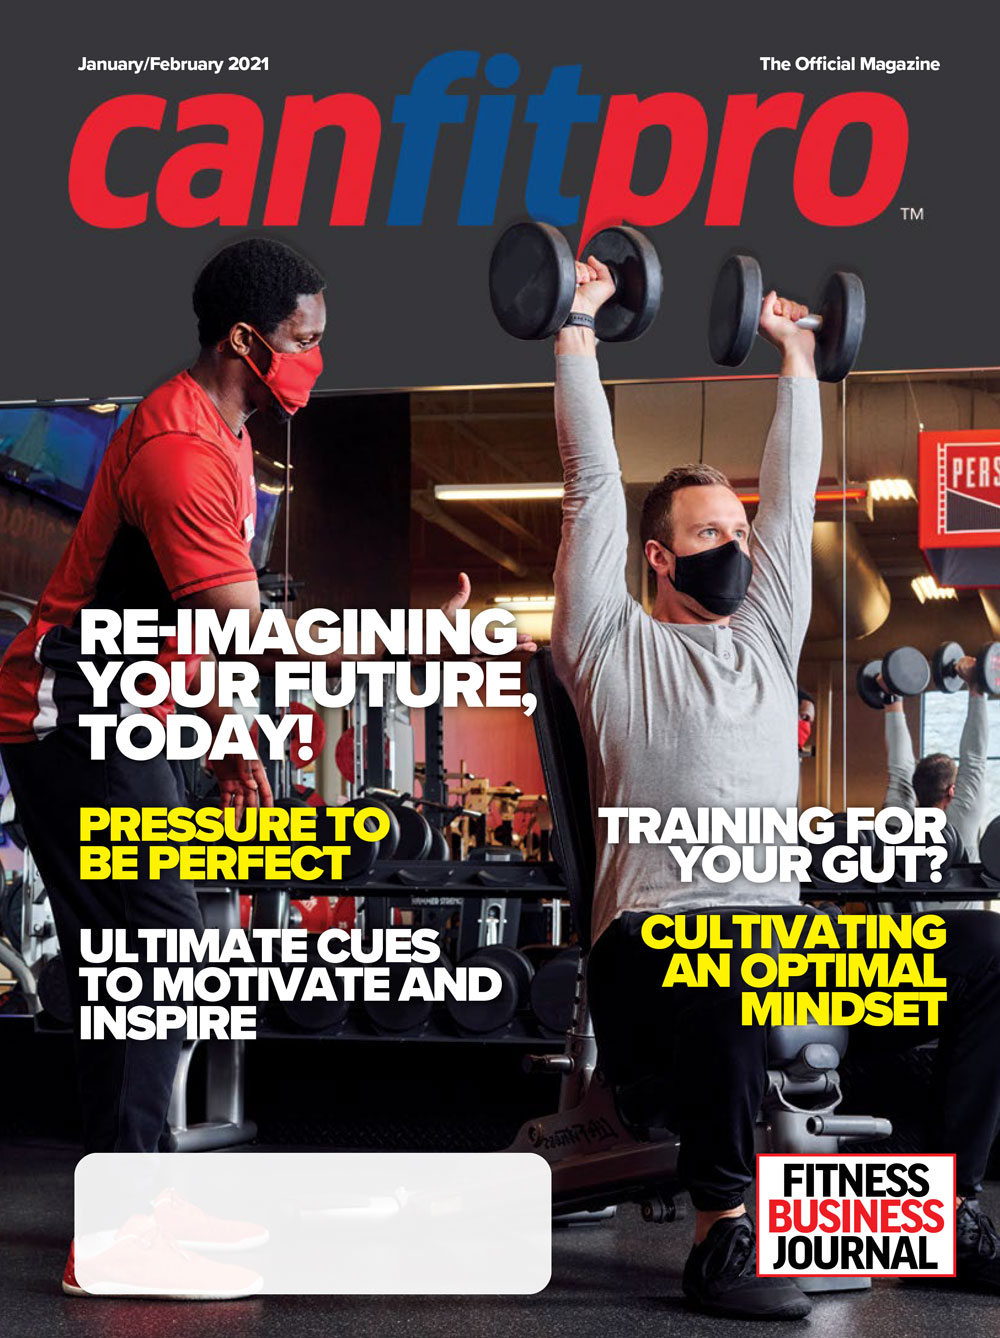 canfitpro official magazine - Jan/Feb 2021 cover